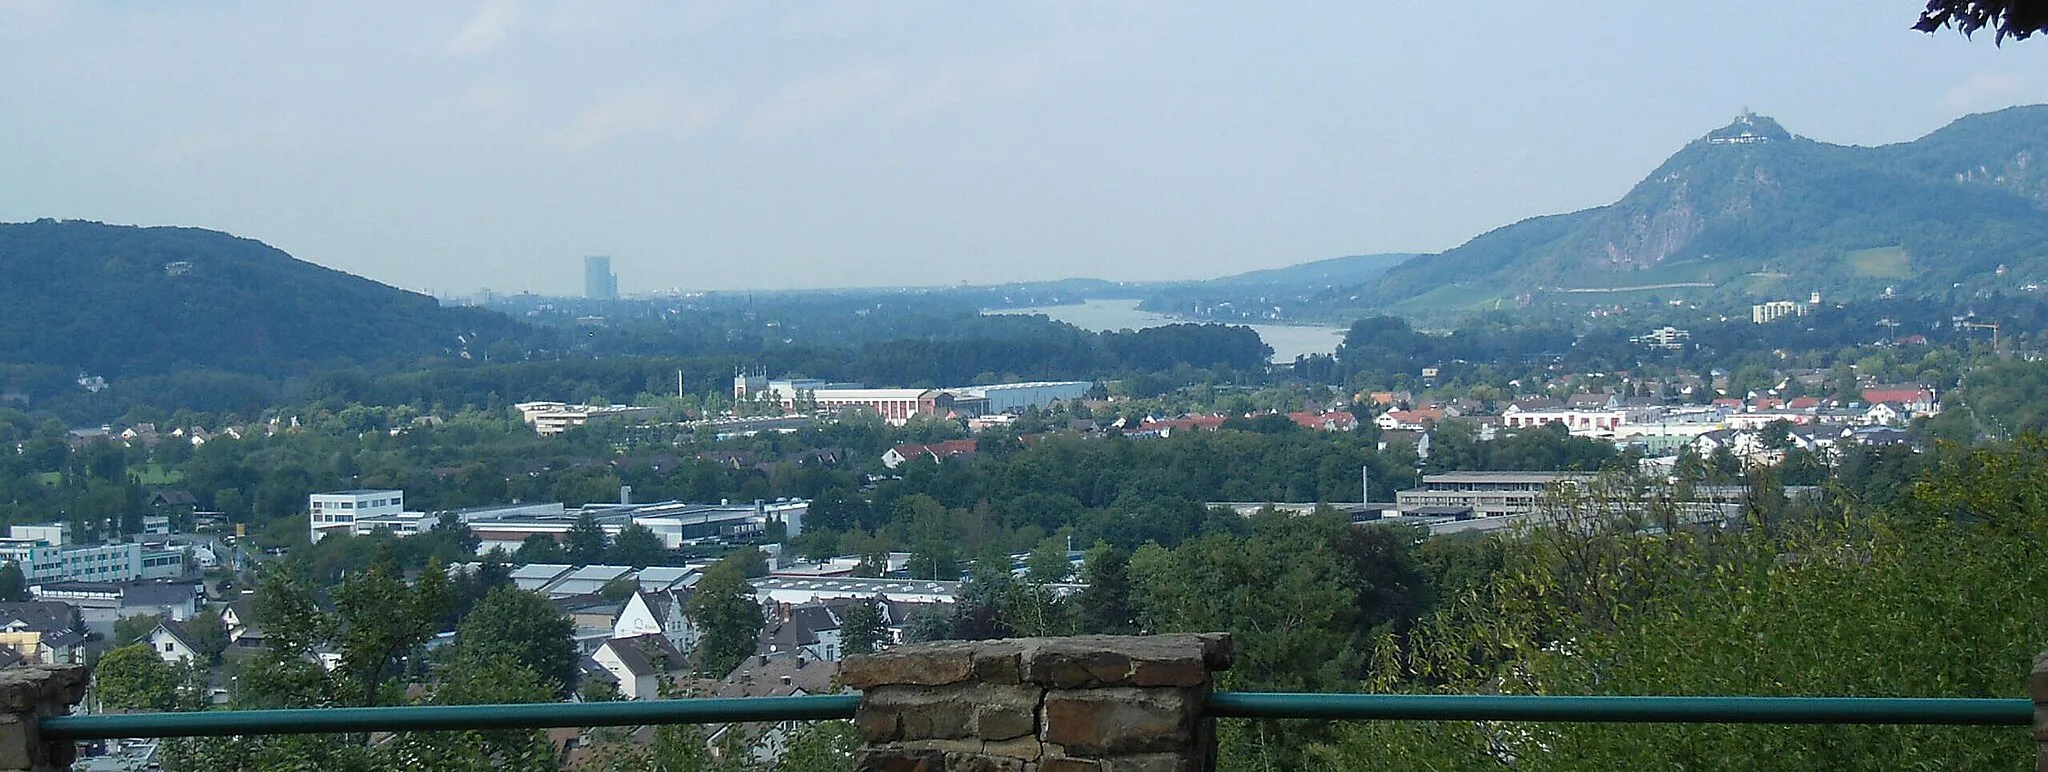 Photo showing: View of Bad Honnef and Bonn from the elevation Koppel in de:Rheinbreitbach. In the background the highrises Post Tower and Langer Eugen can be seen.